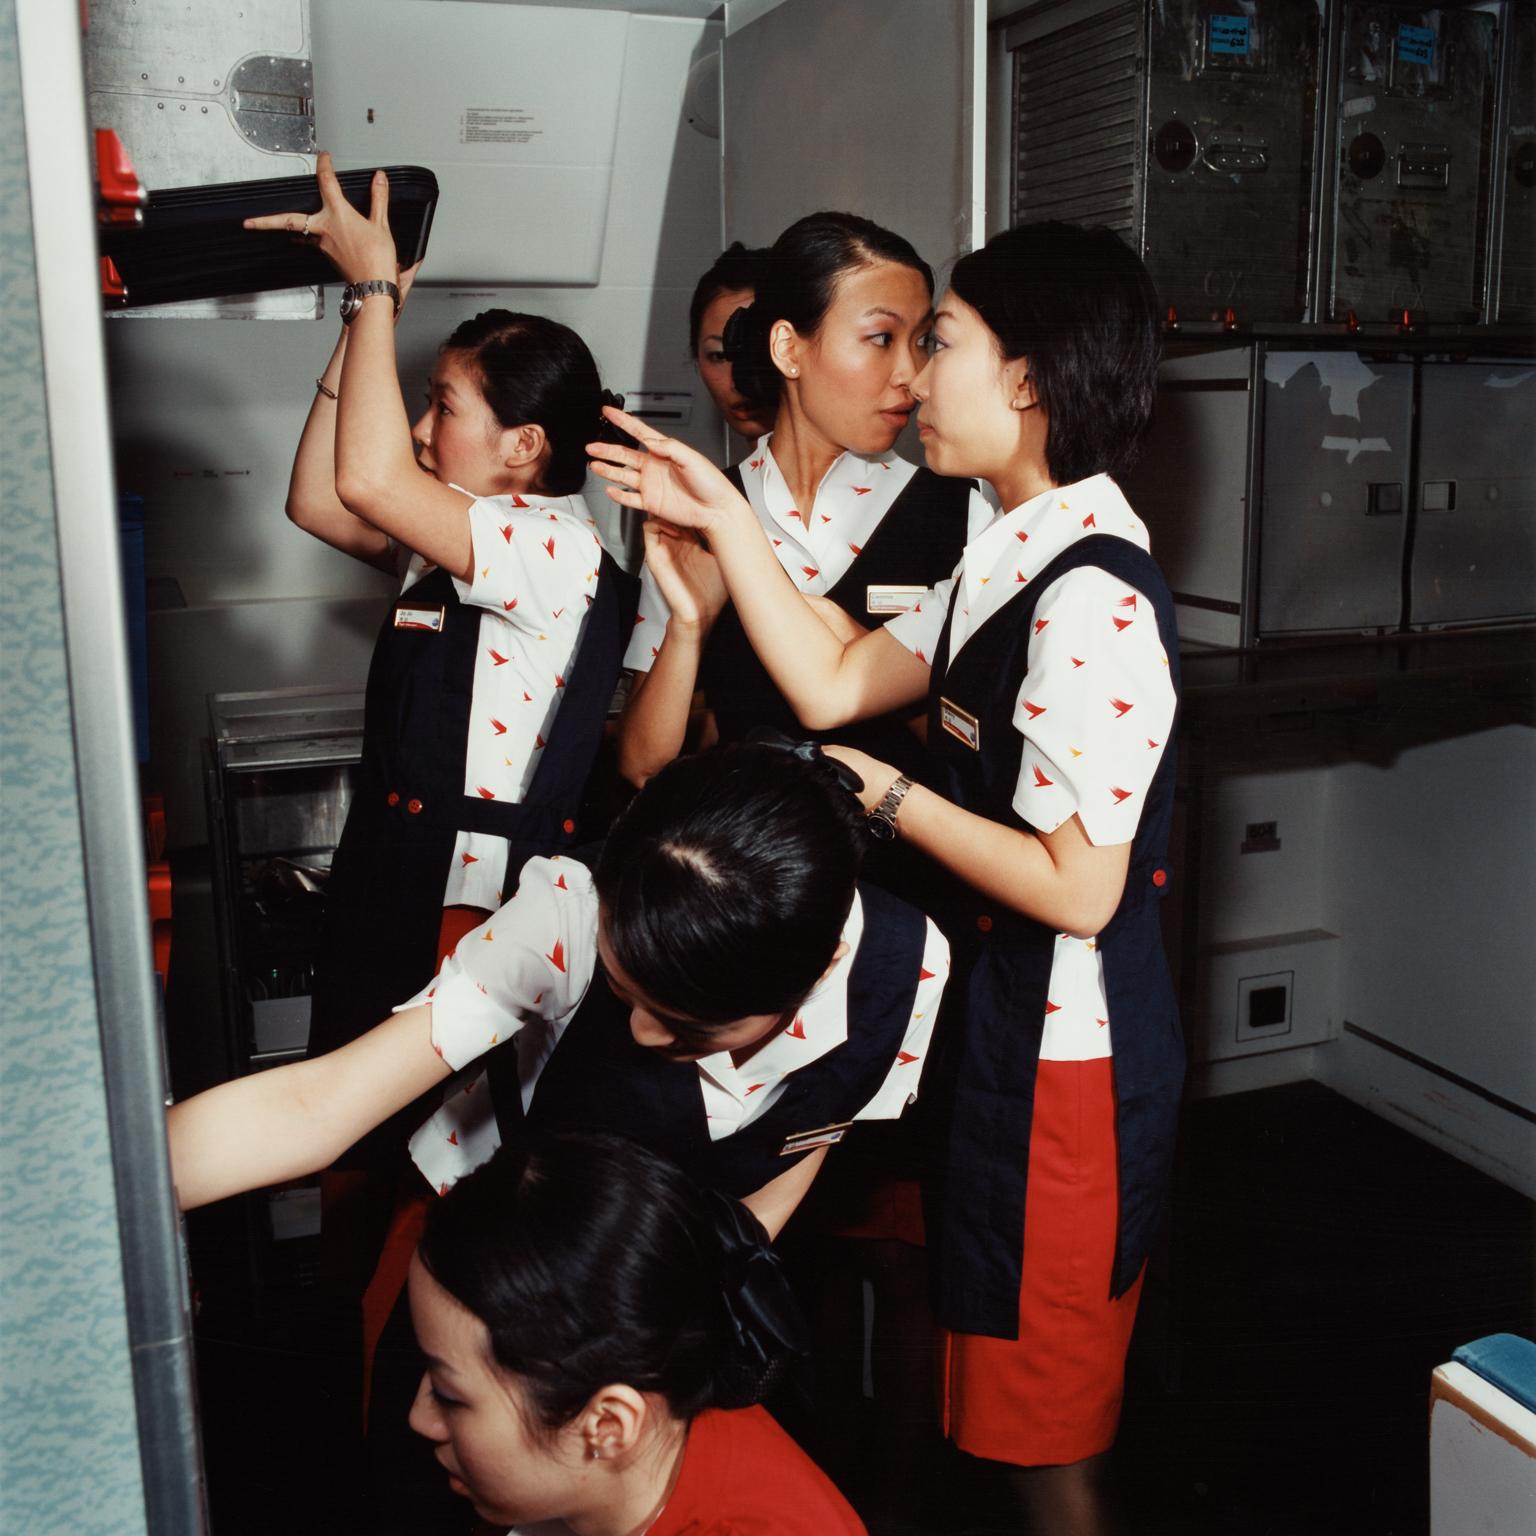 Brian Finke Color Photograph - Untitled (Cathay Pacific Airways)